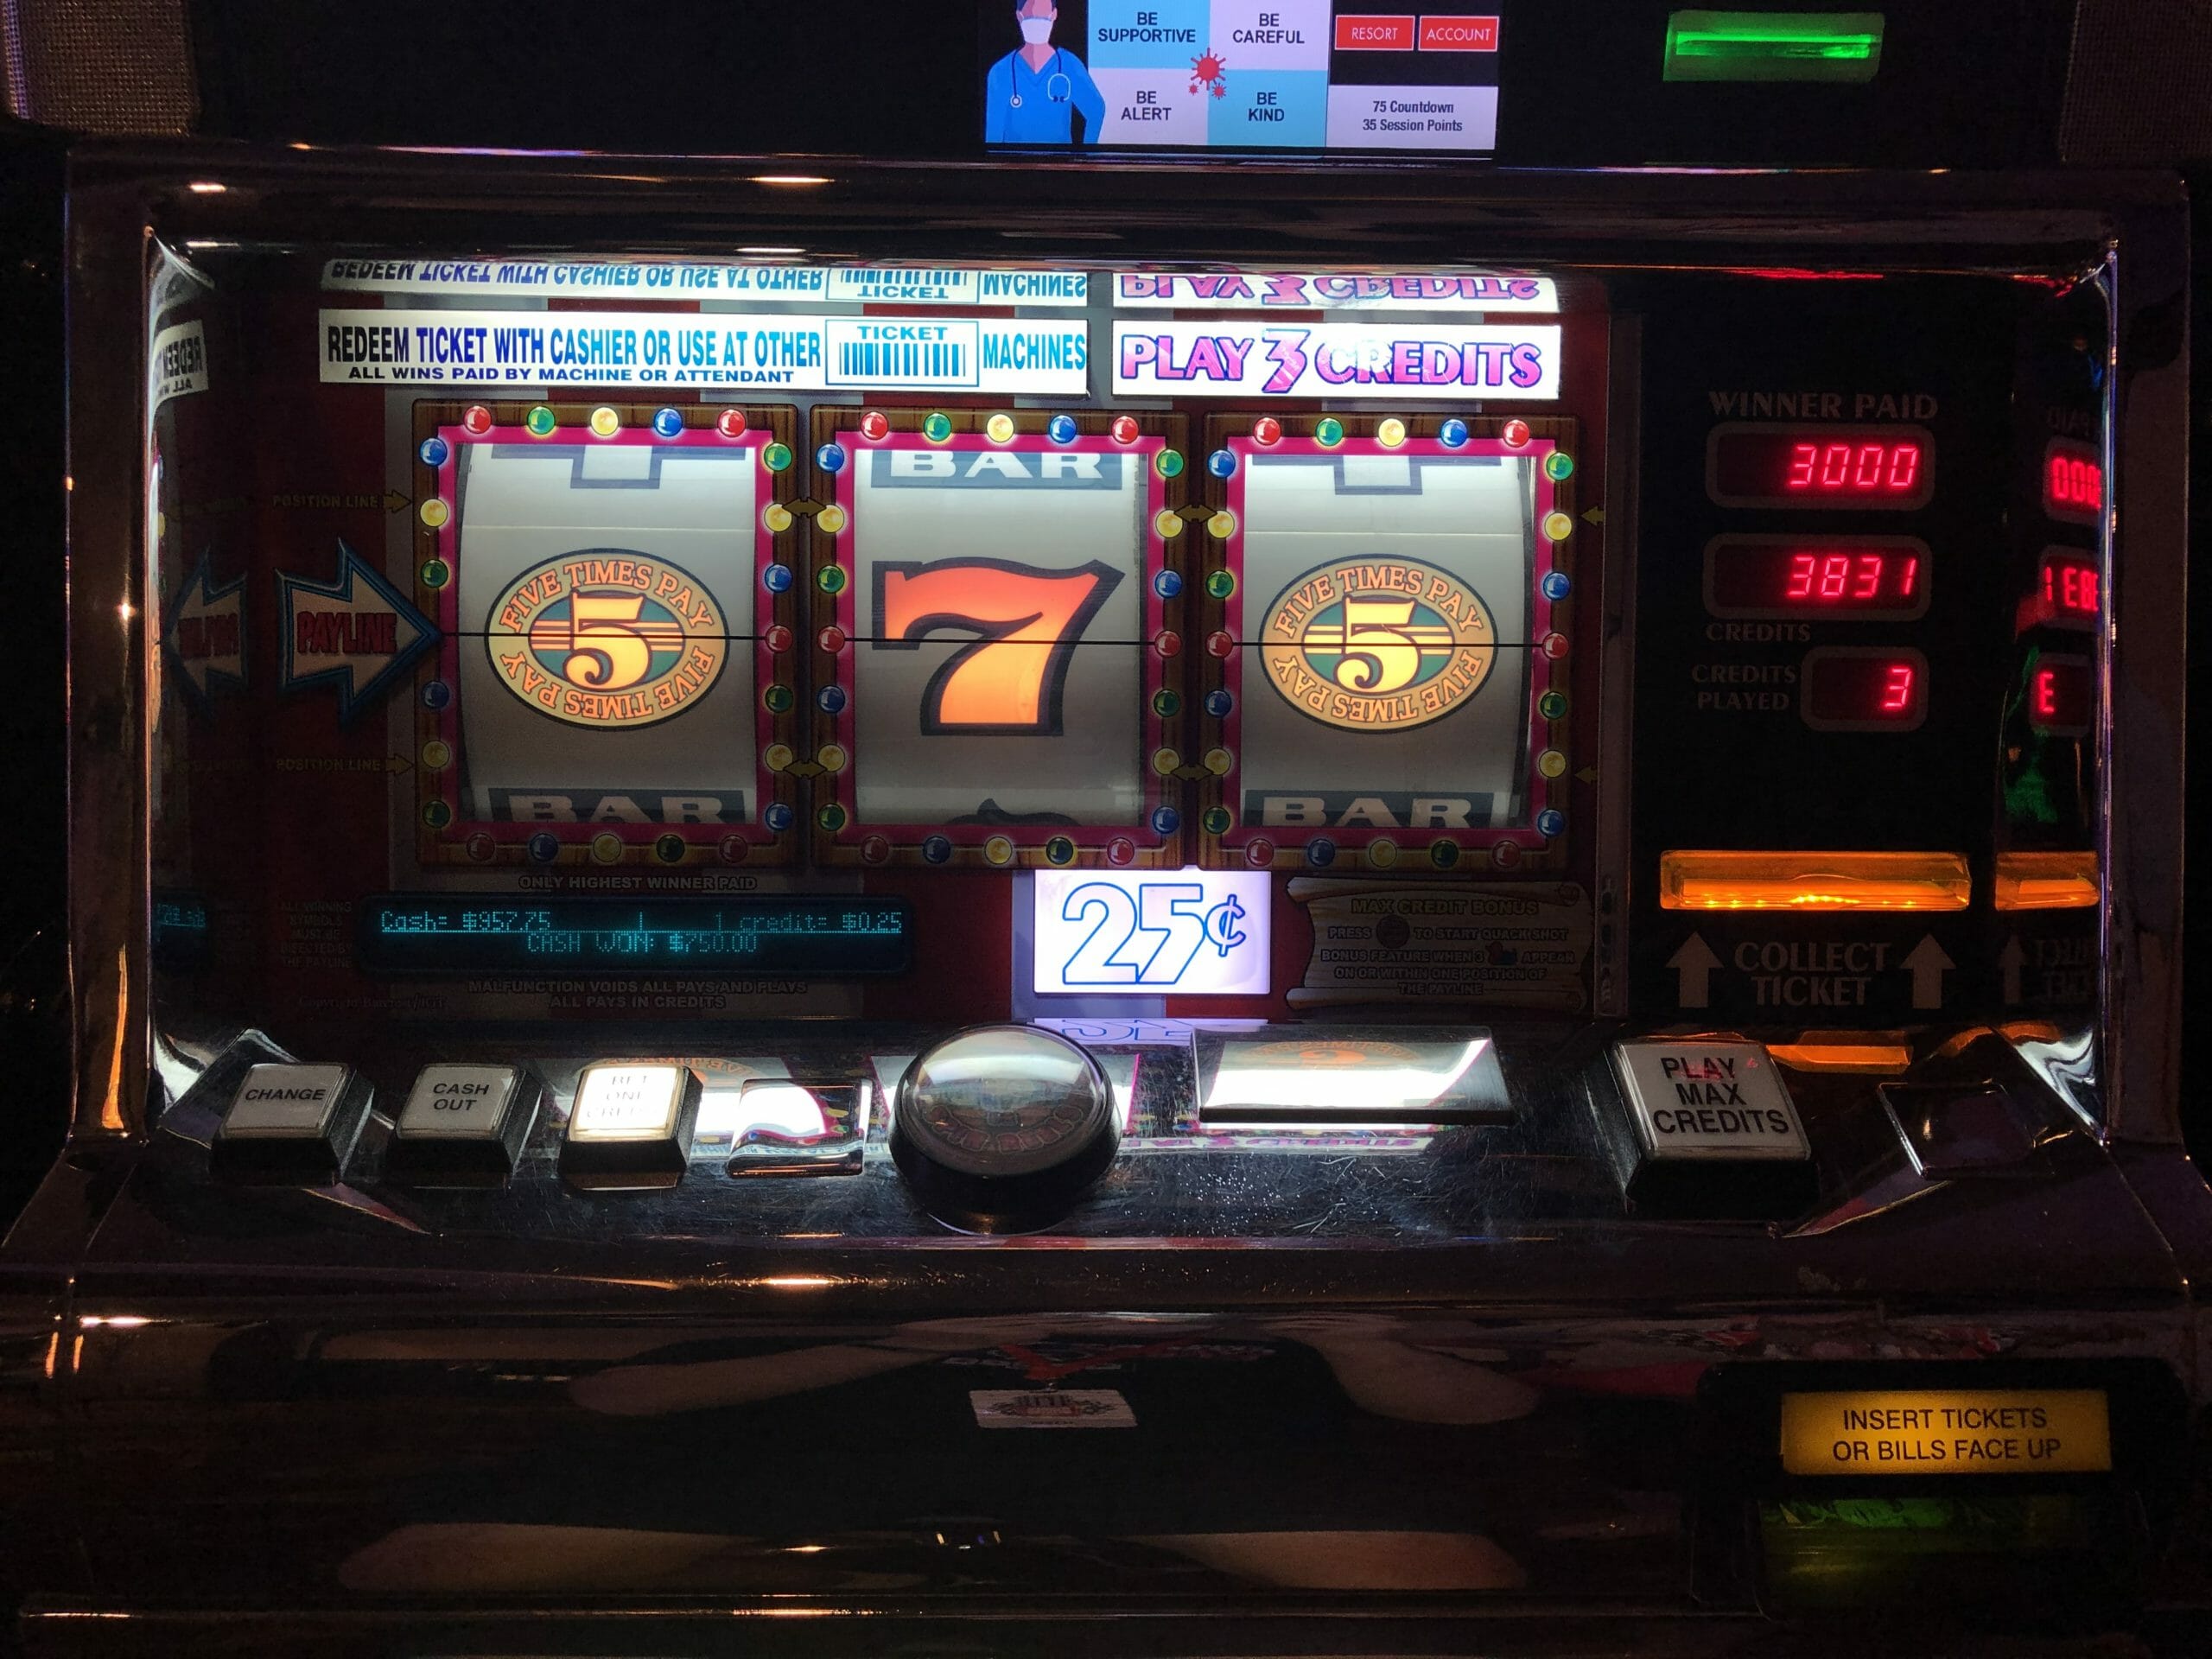 does stopping reel on slot machine help